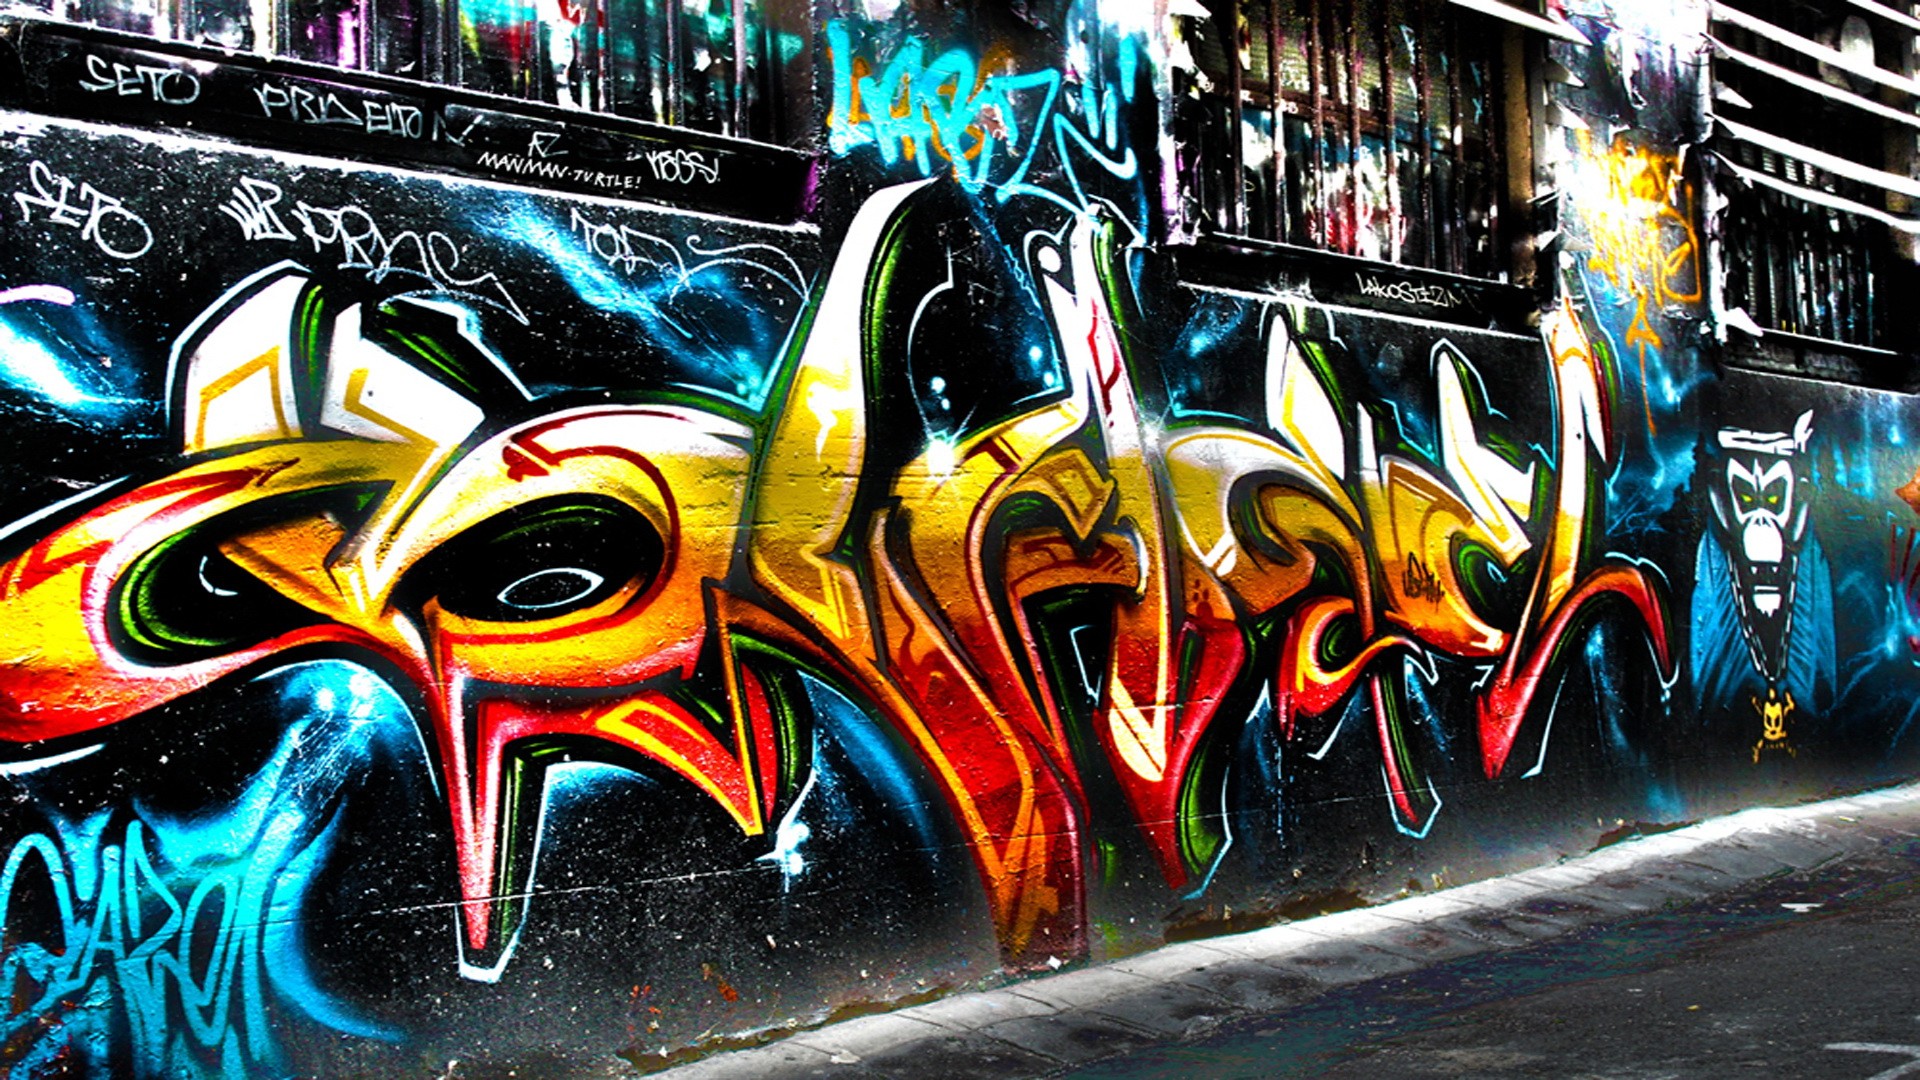 HD Wallpaper Graffiti Letters with image resolution 1920x1080 pixel. You can make this wallpaper for your Desktop Computer Backgrounds, Mac Wallpapers, Android Lock screen or iPhone Screensavers